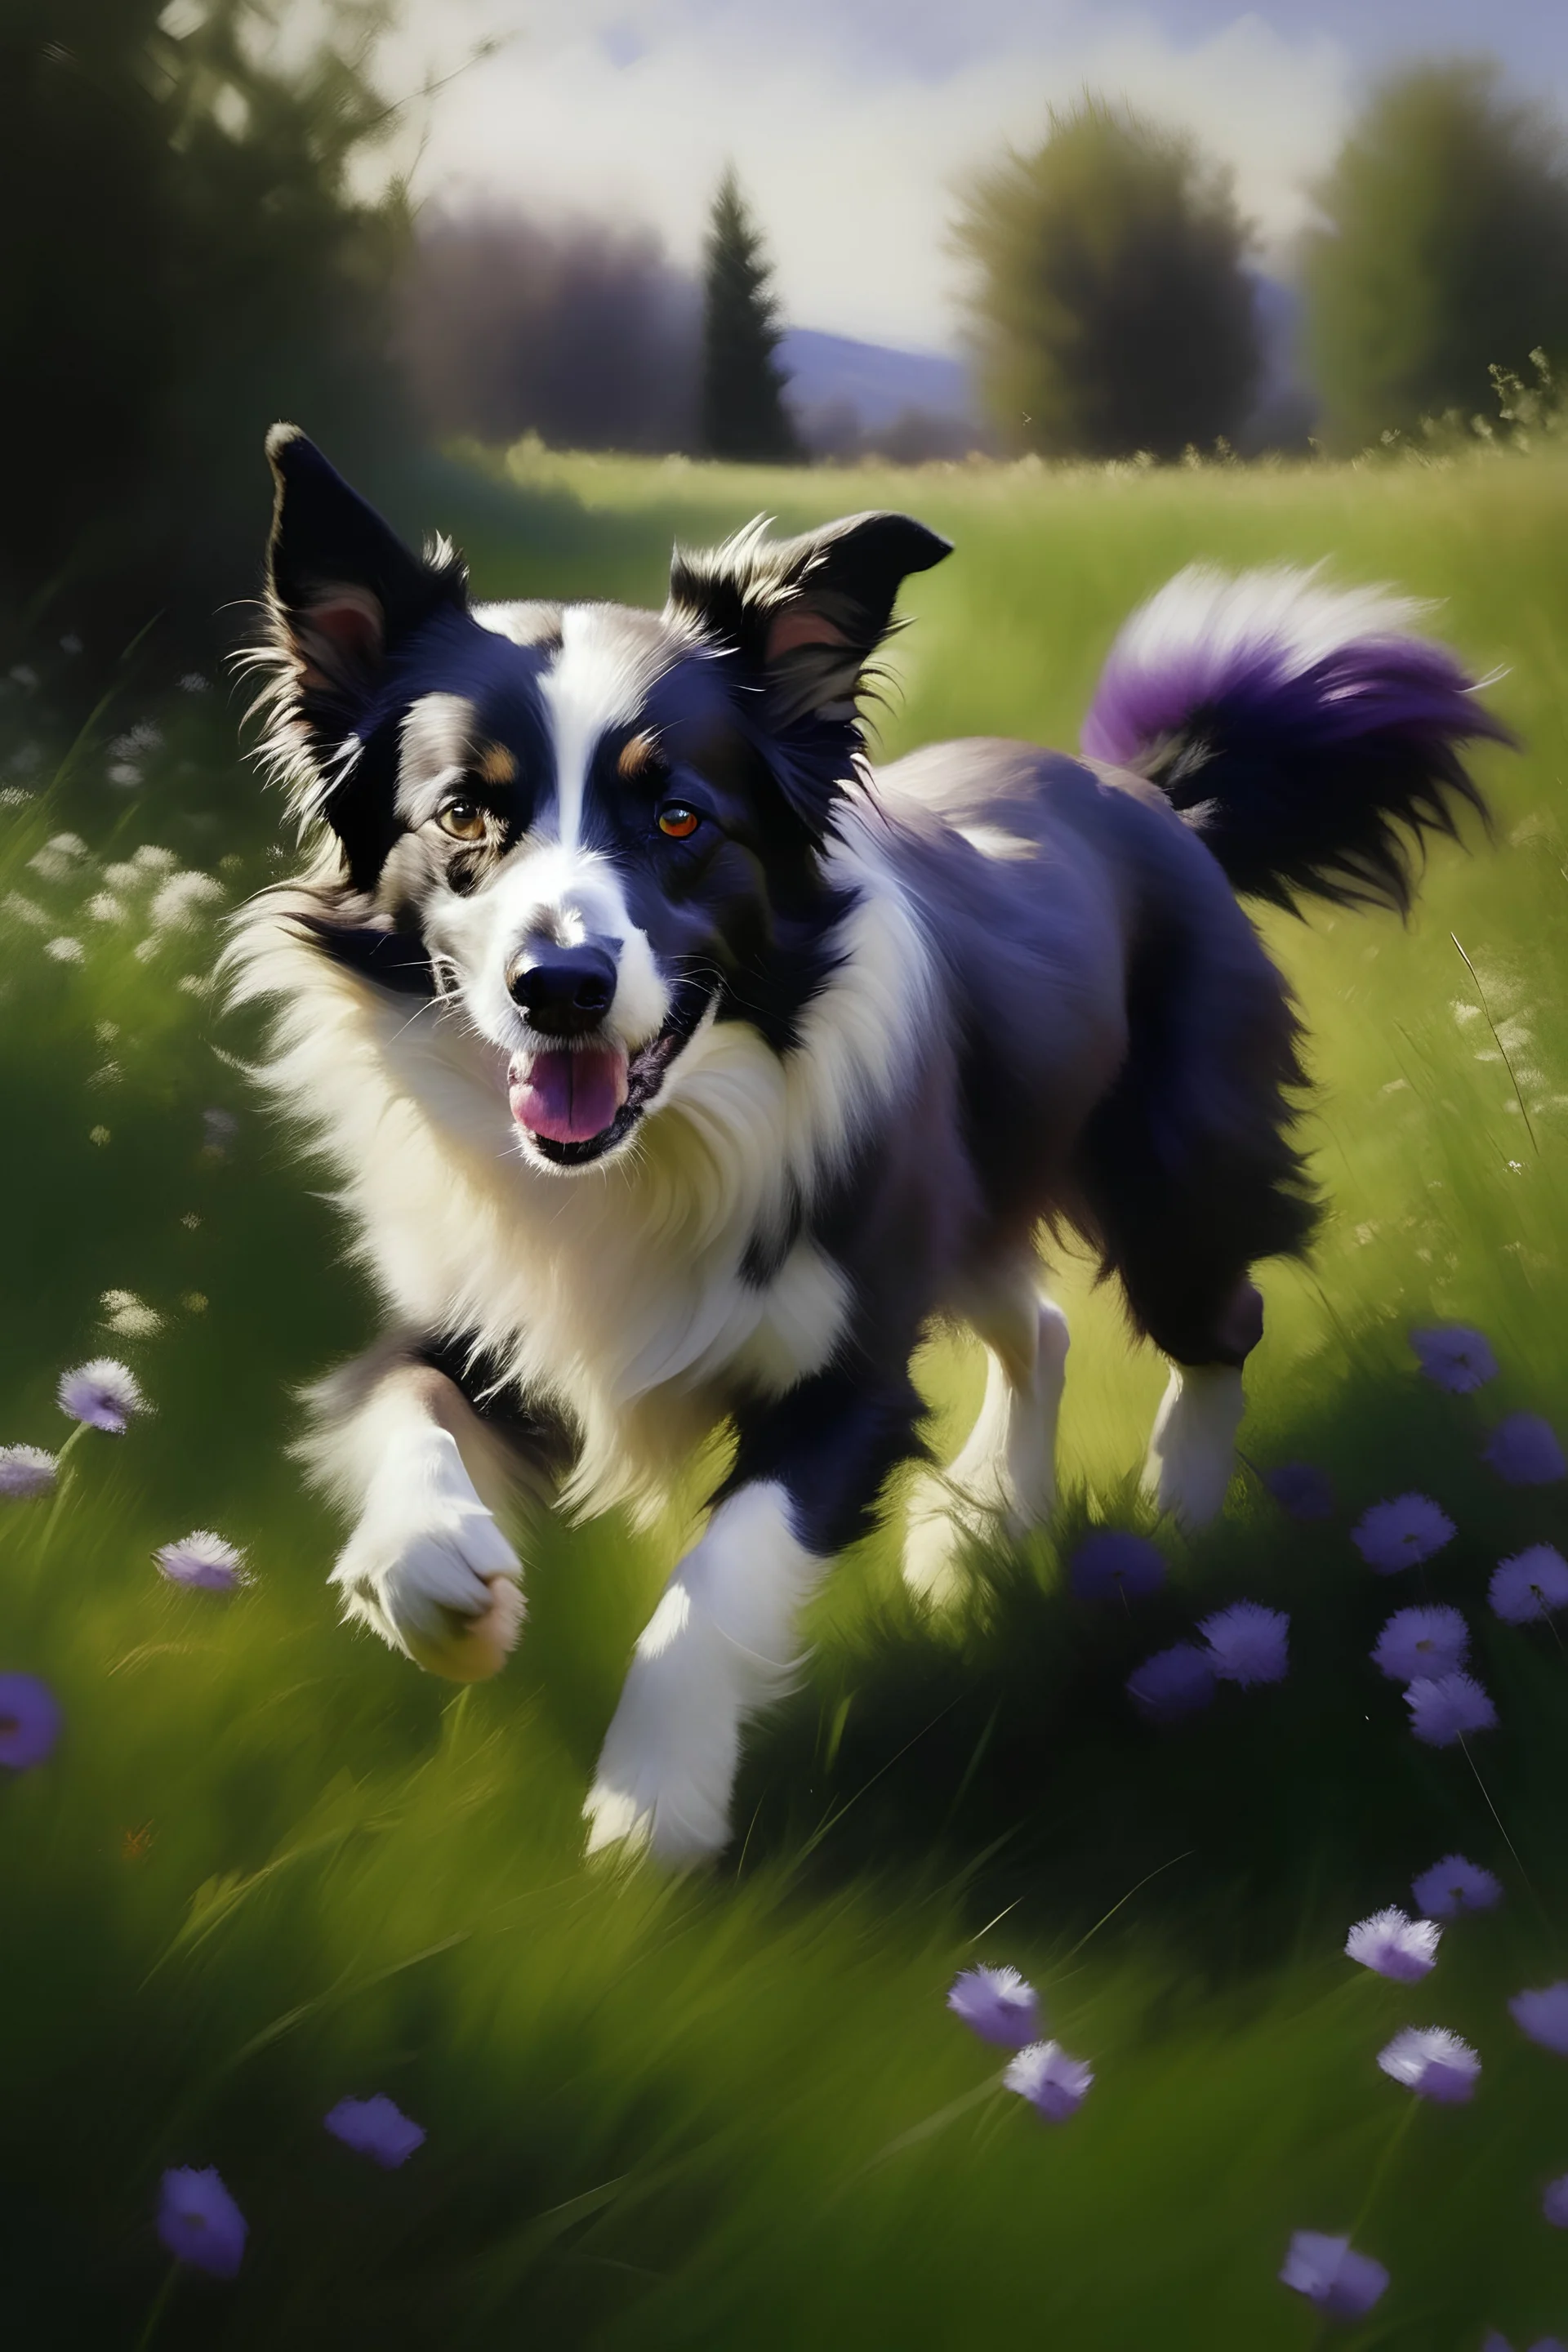 (A cute Border Collie:1.2), (Running on a sunny grassy lawn:1.1), (Covered in purple lilac flowers:1.1), Medium Shot, Natural Lighting, (Realistic, Naturalistic:1.1)